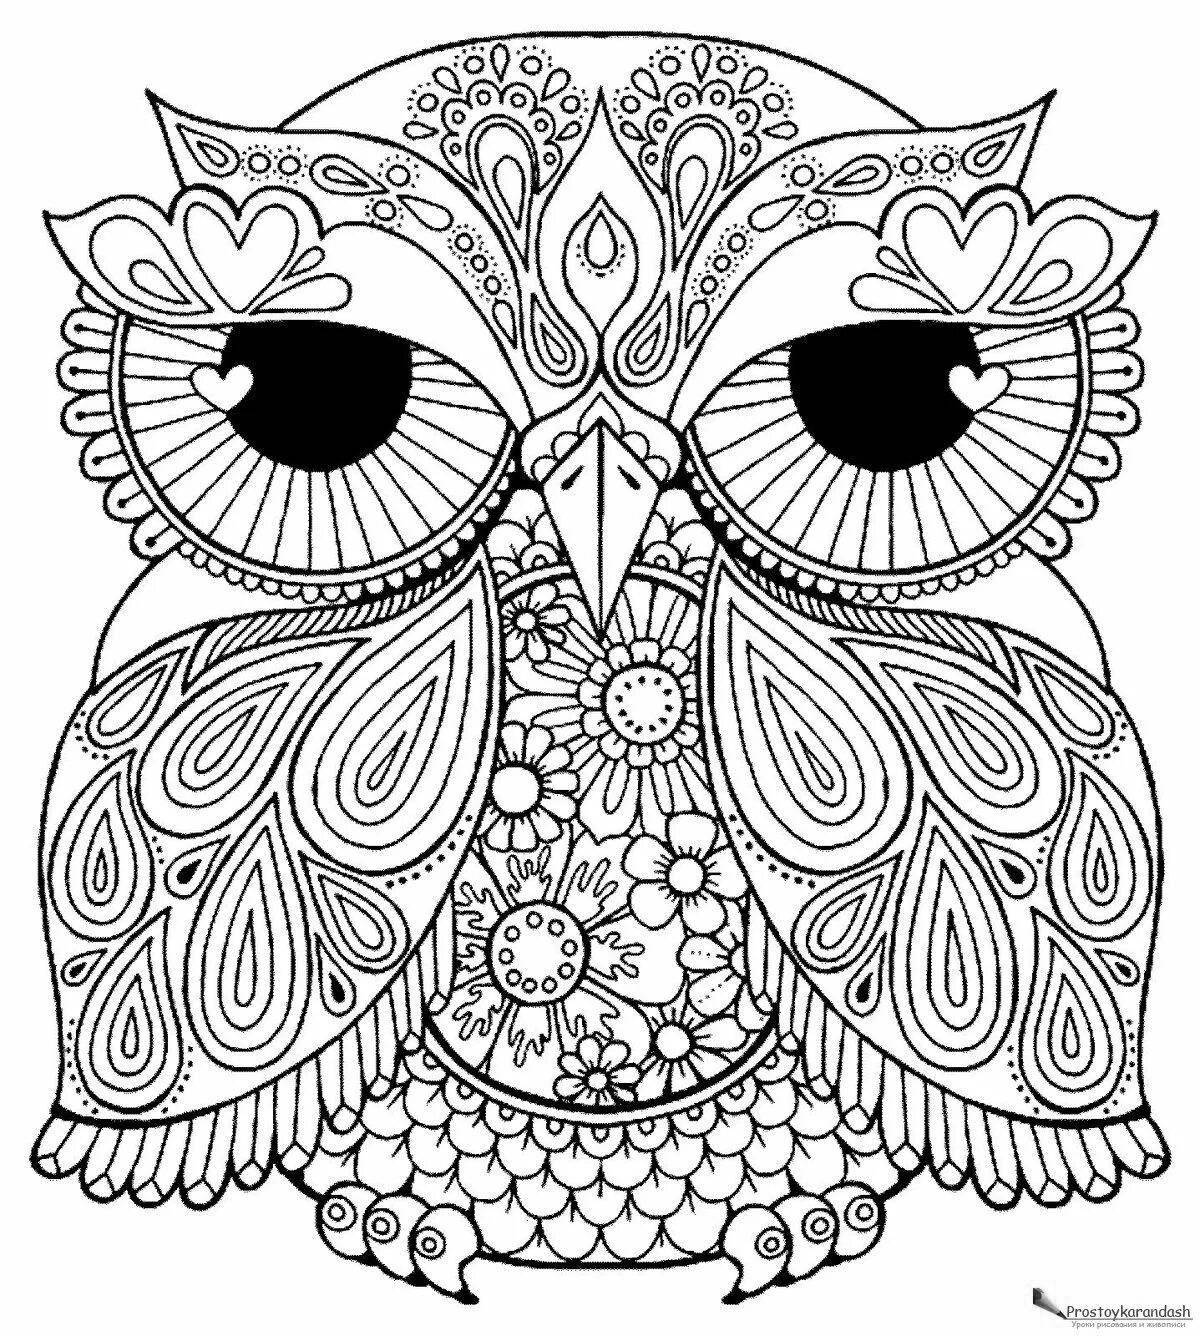 Delicate adult coloring pages